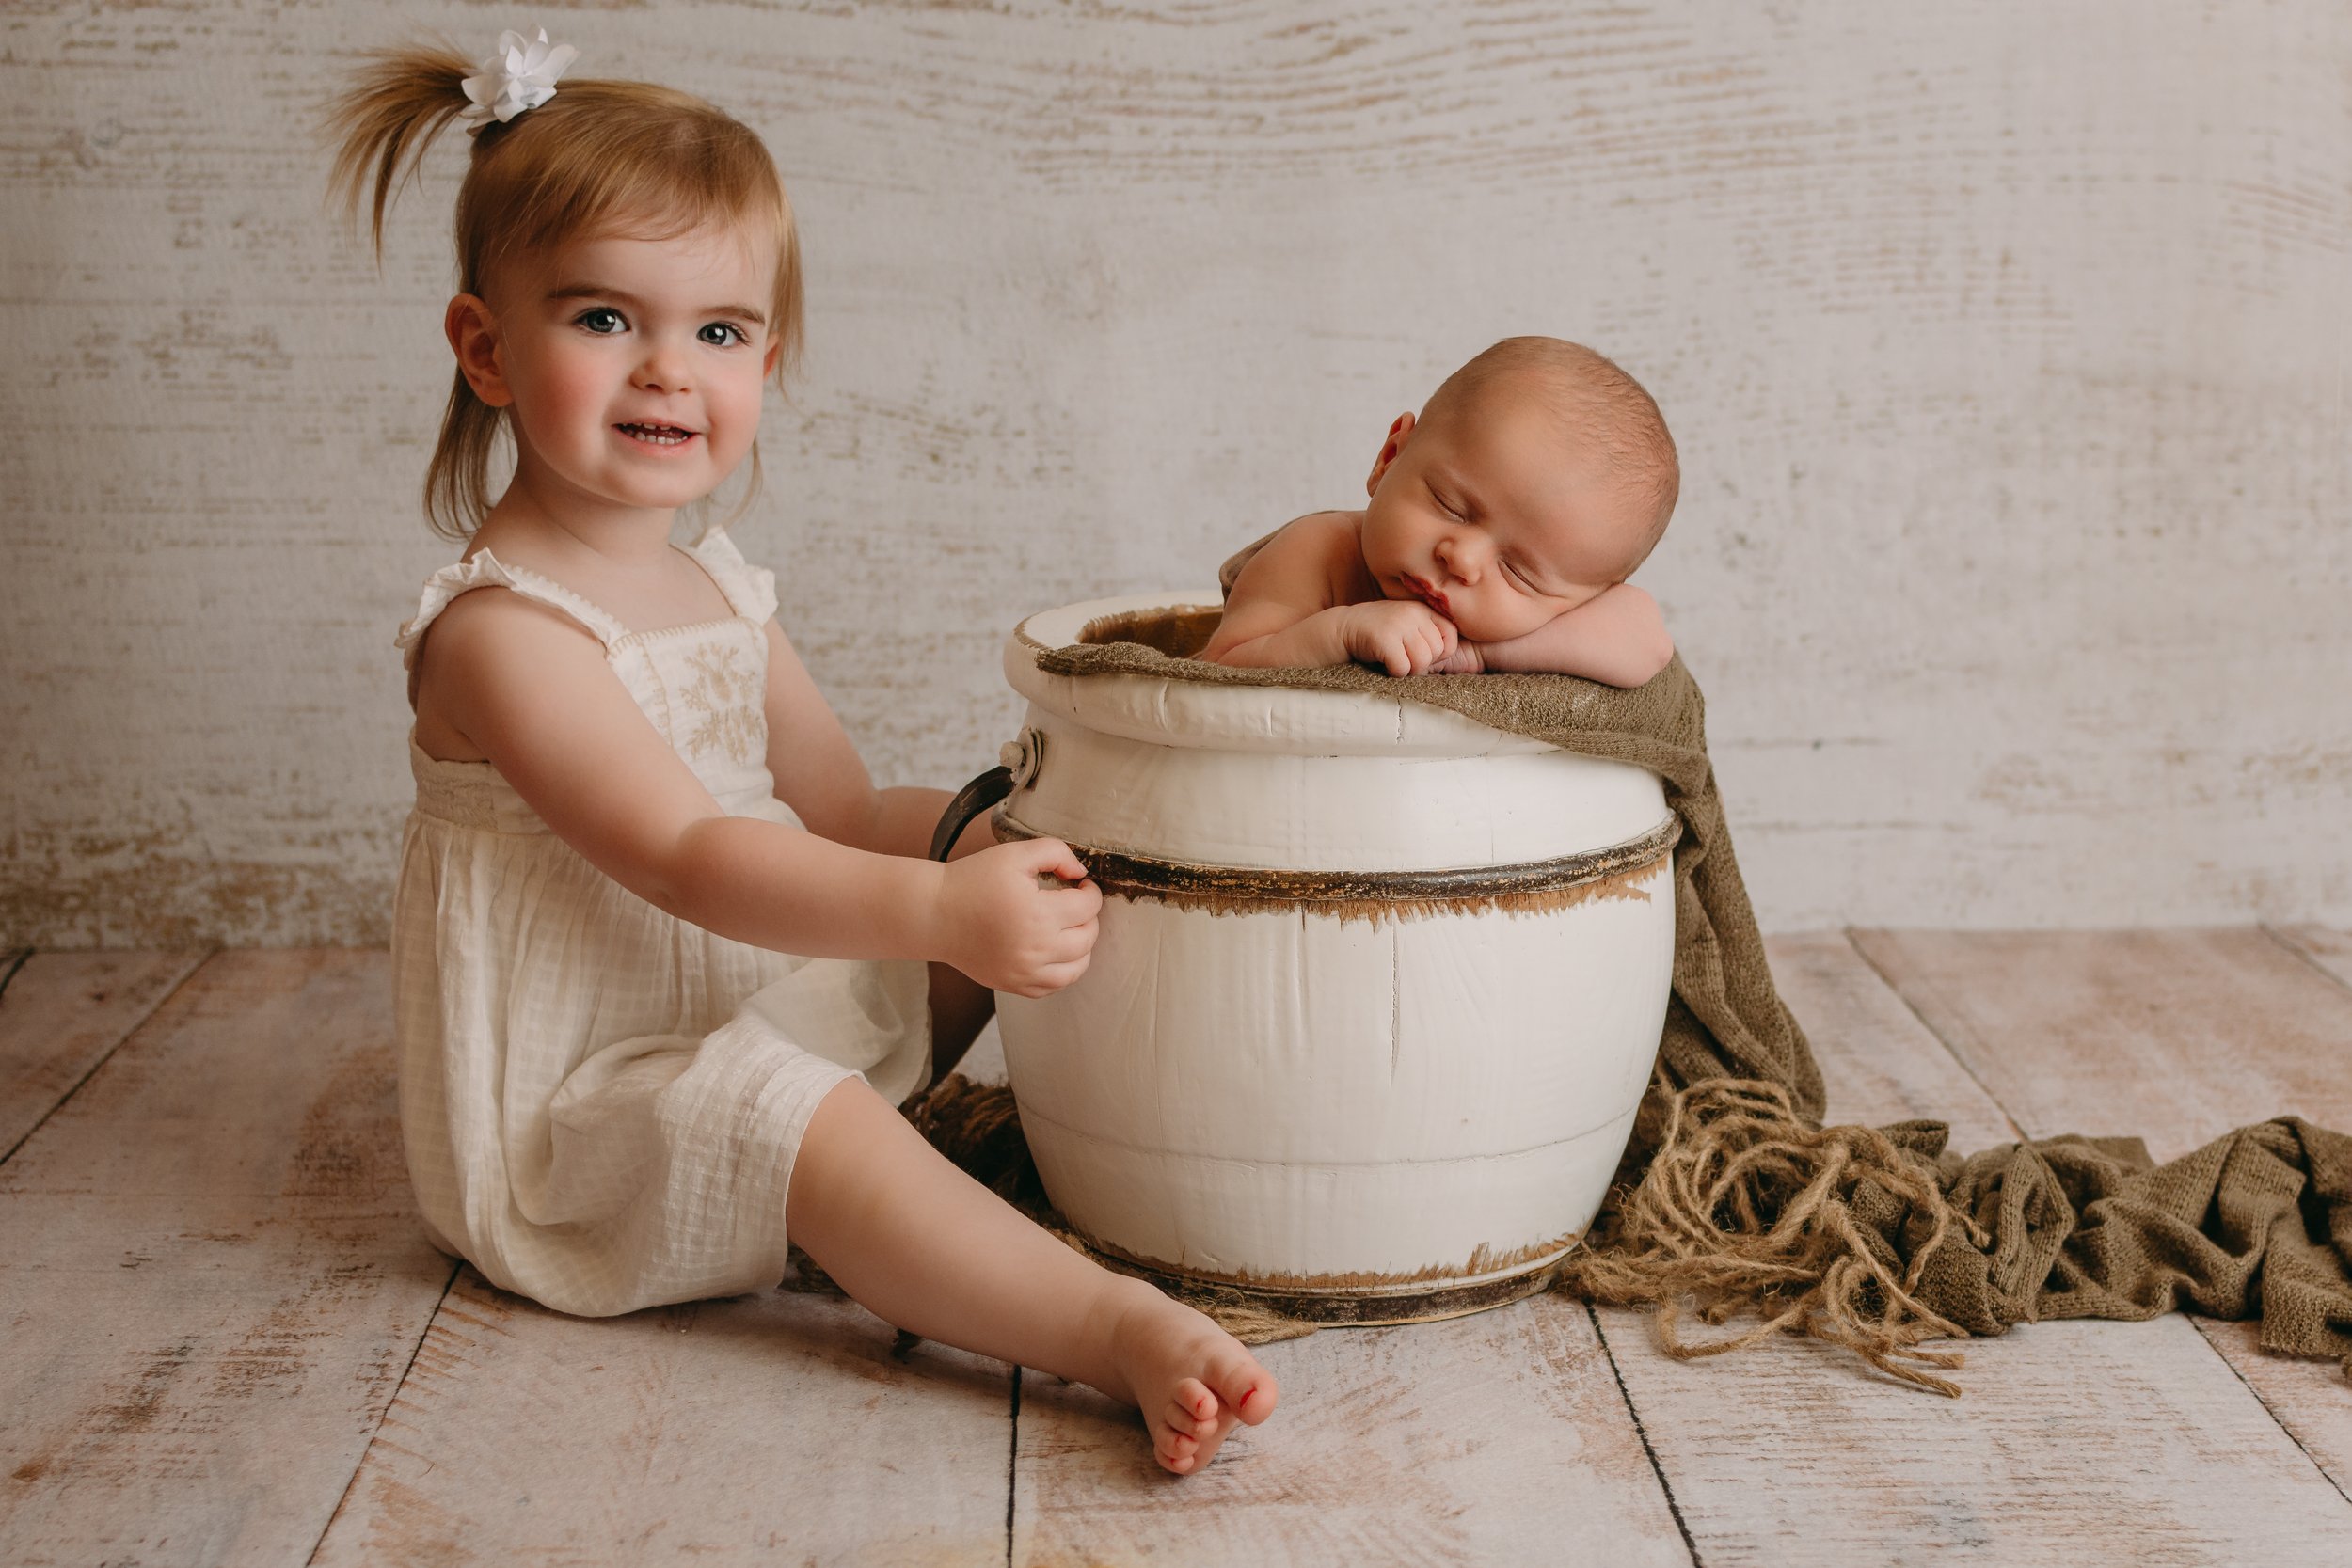 Big sister next to newborn baby in a bucket